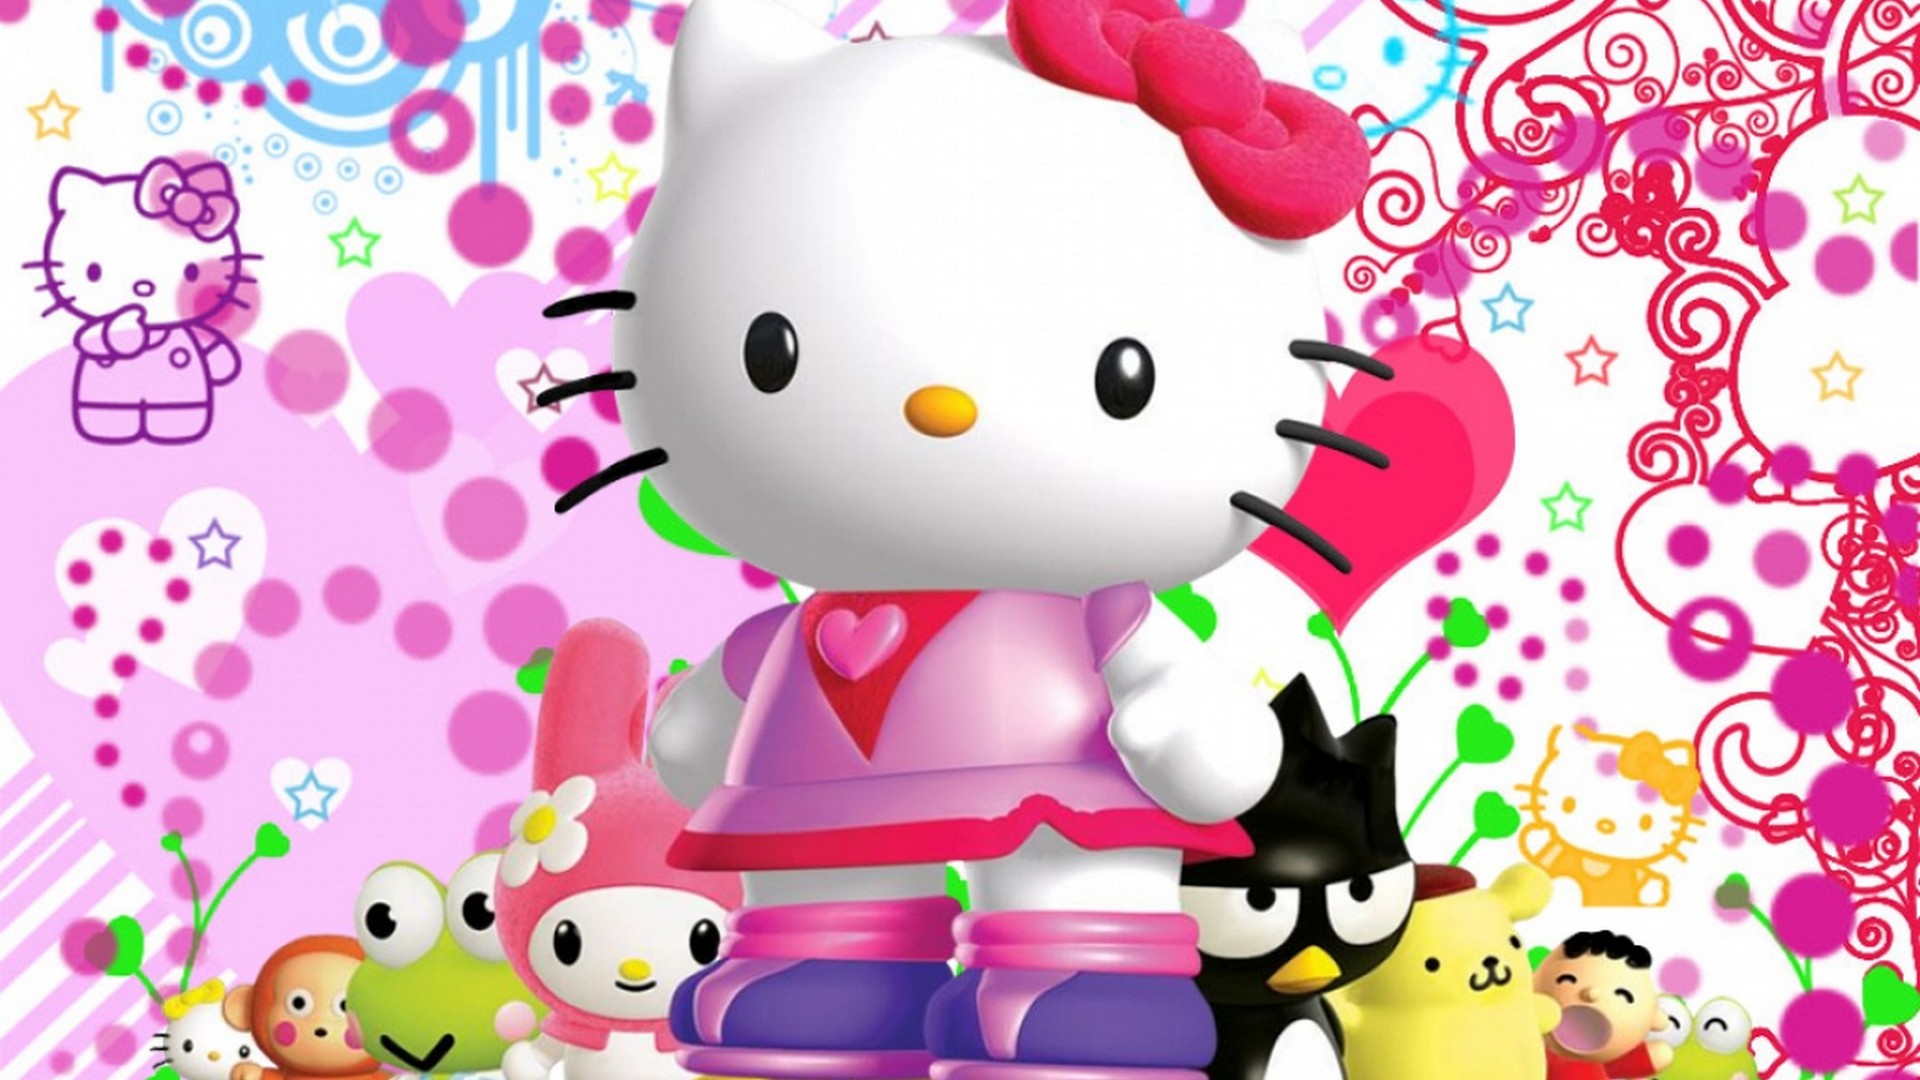 Wallpaper Kitty with image resolution 1920x1080 pixel. You can use this wallpaper as background for your desktop Computer Screensavers, Android or iPhone smartphones